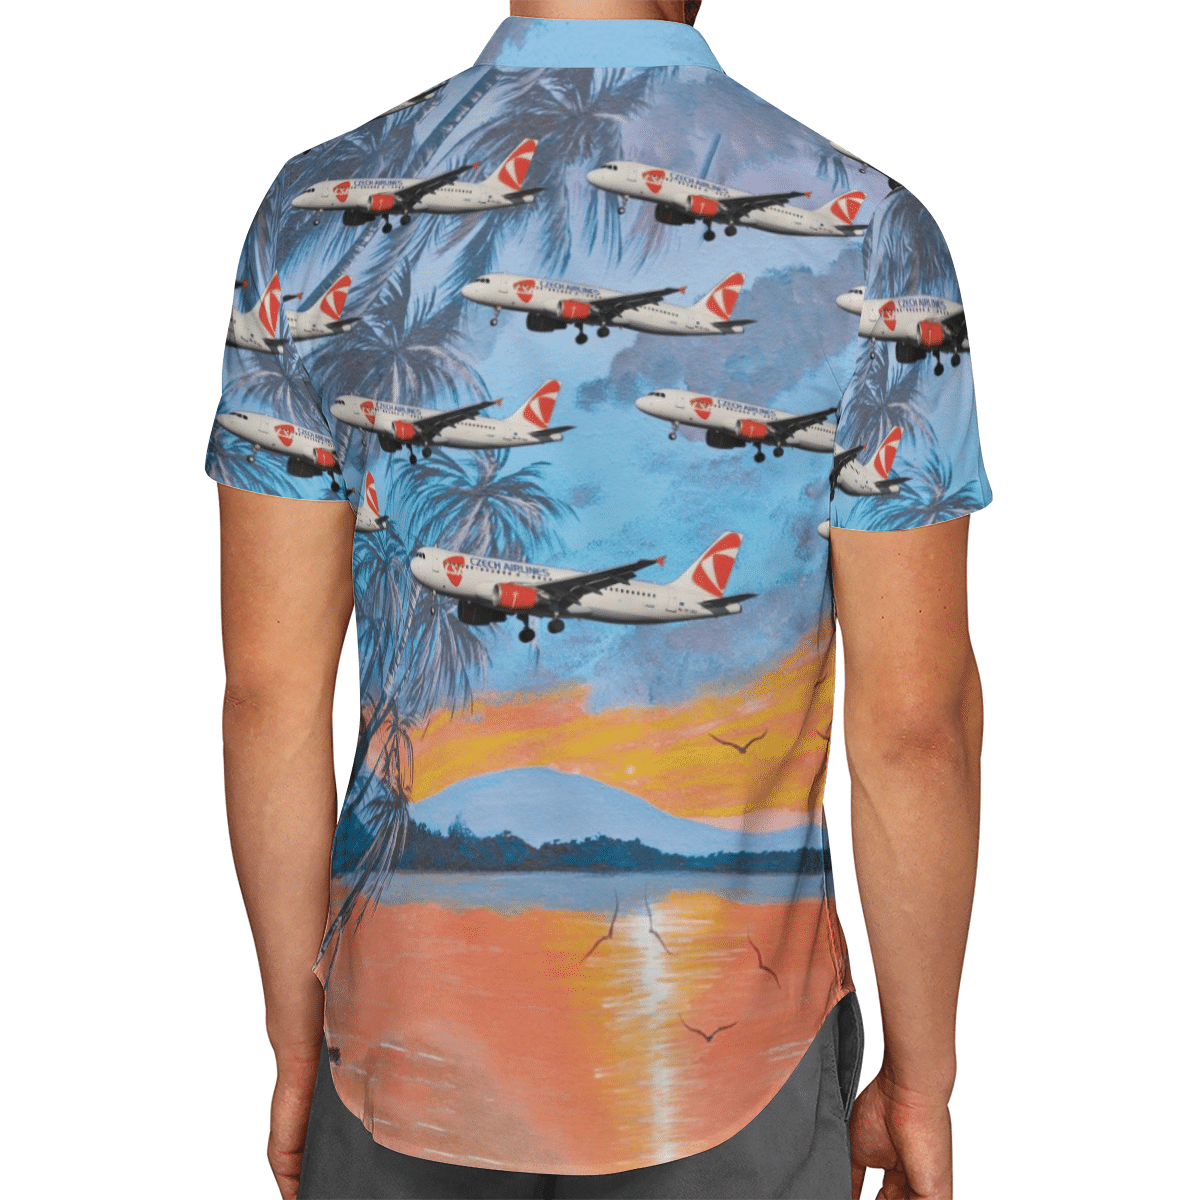 Going to the beach with a quality shirt 120